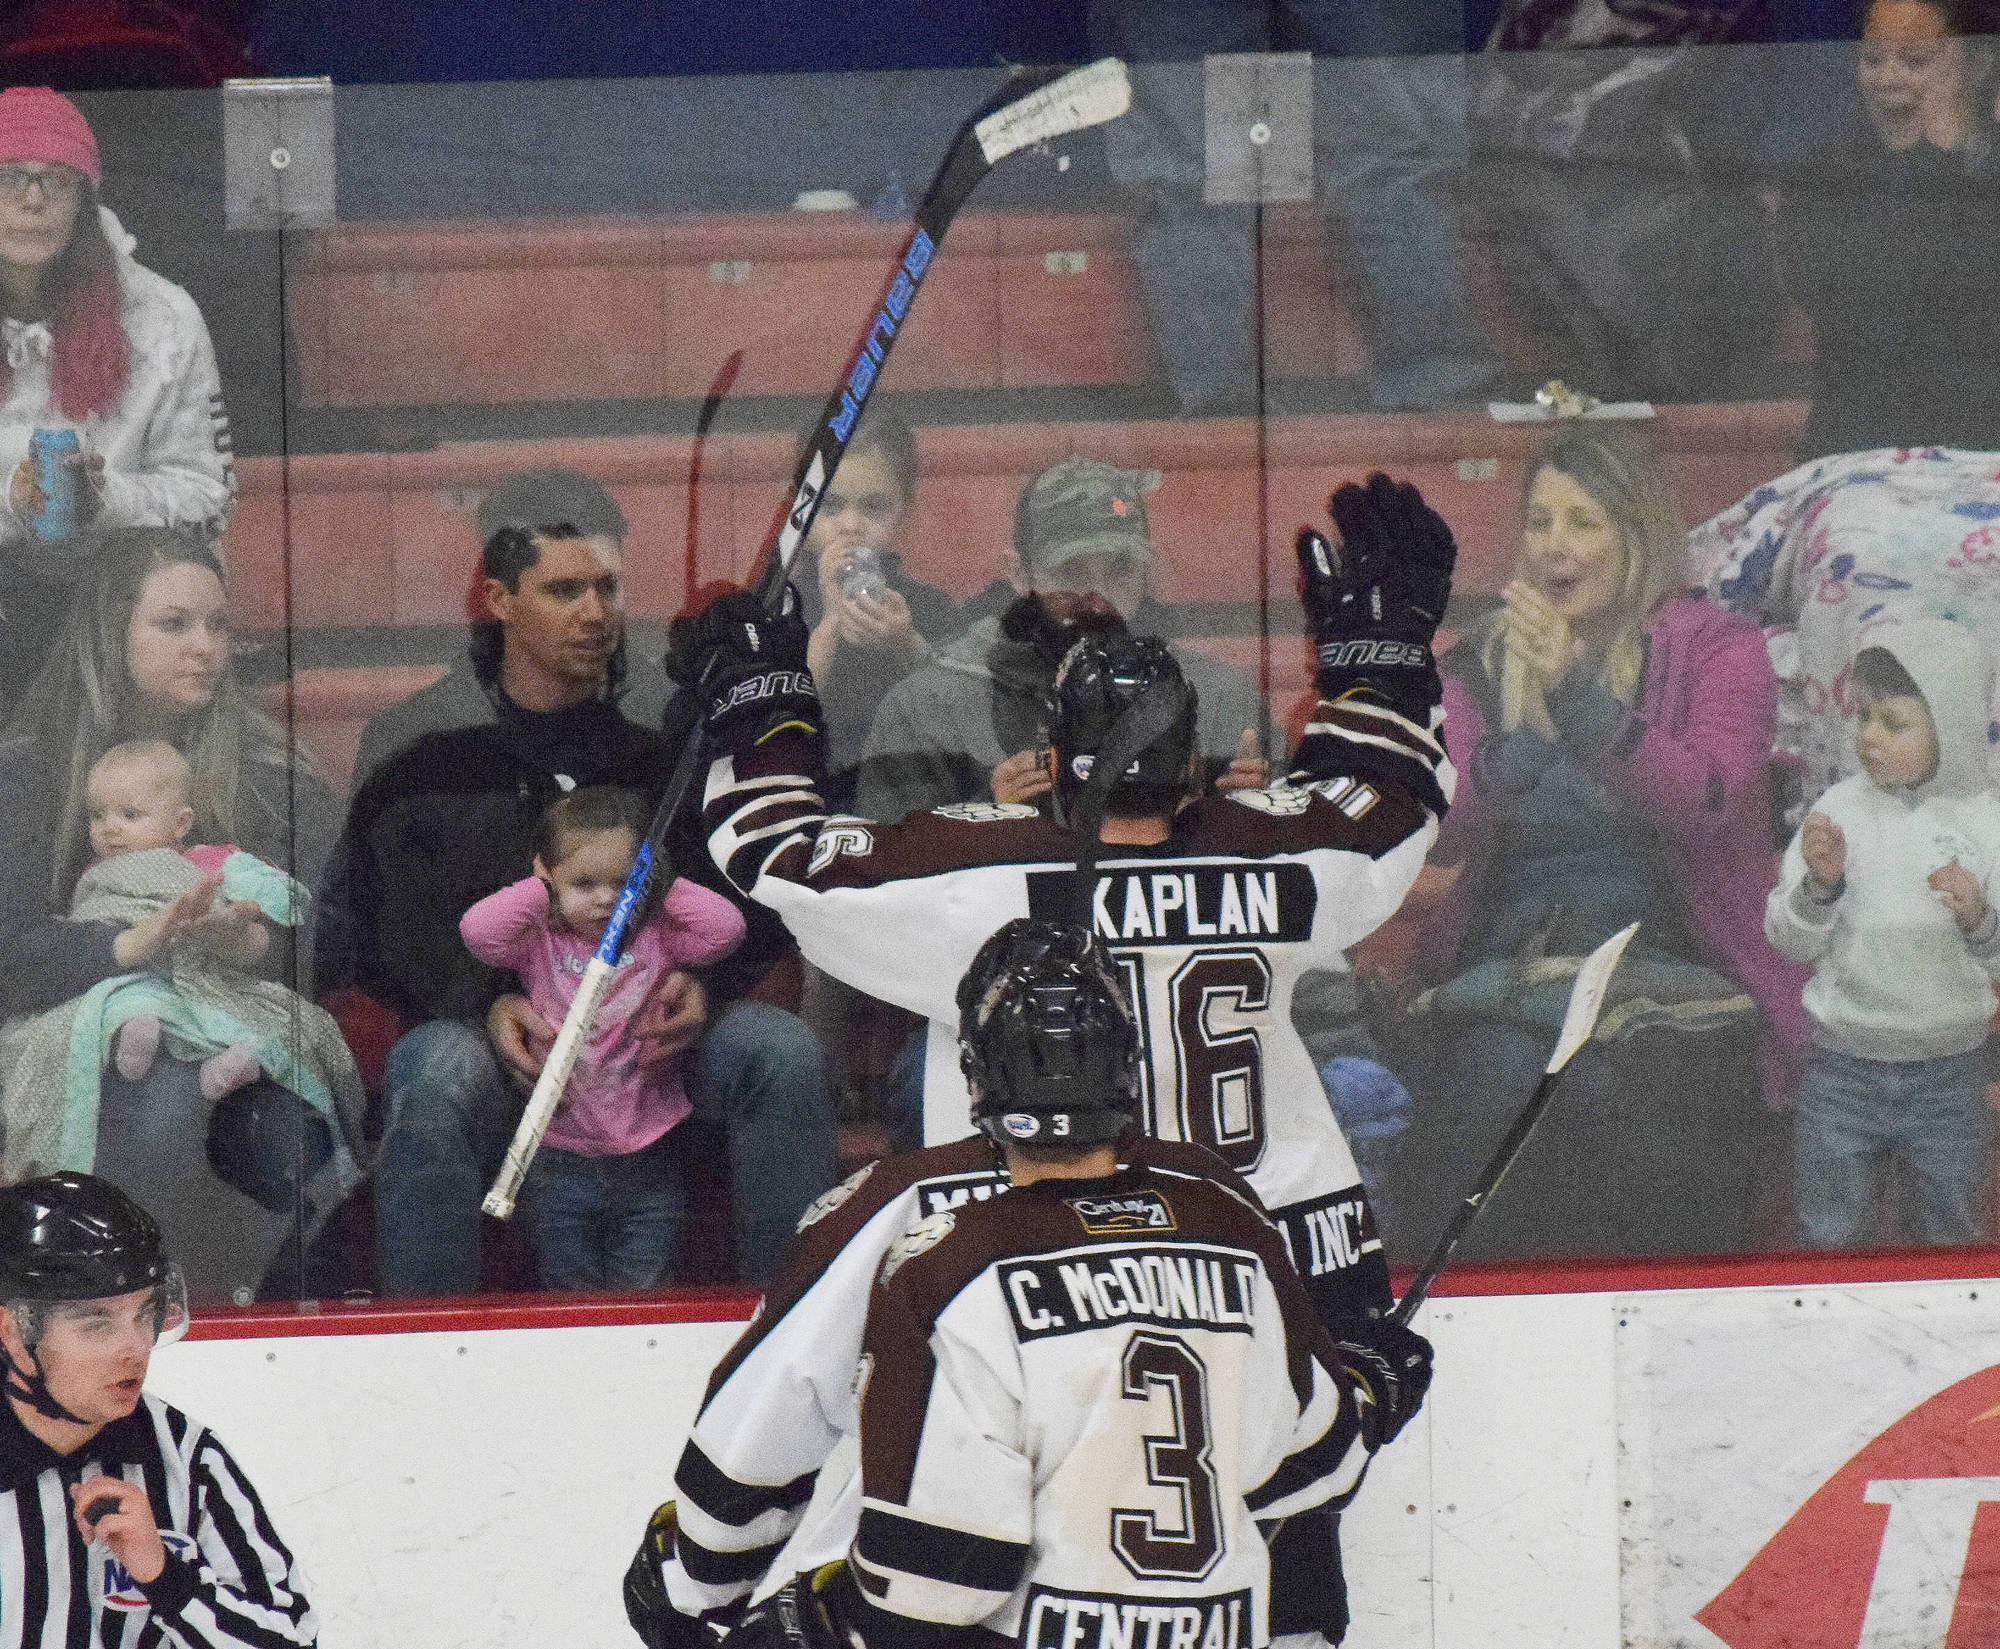 Kenai River forward David Kaplan (16) thrills the home crowd Friday night at the Soldotna Regional Sports Complex after scoring a second-period goal against the Coulee Region (Wisconsin) Chill. (Photo by Joey Klecka/Peninsula Clarion)